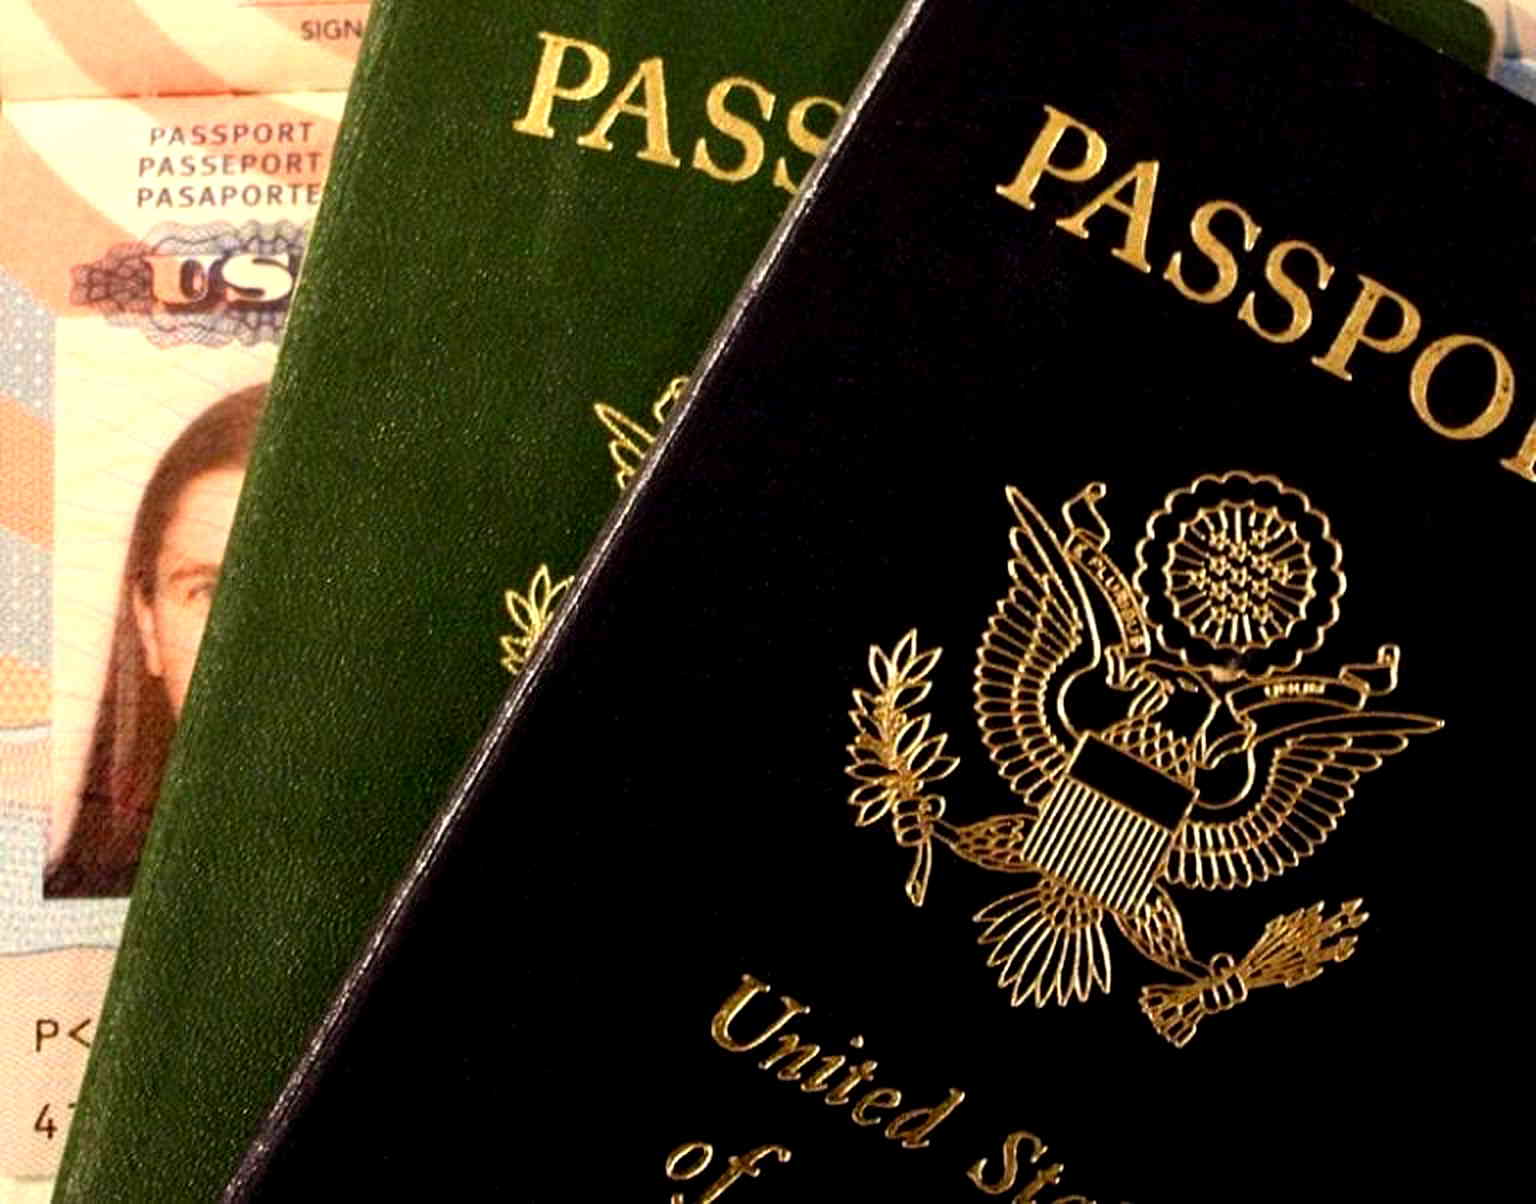 The U.S. Just Made it Harder for Foreigners to Get Work Visas